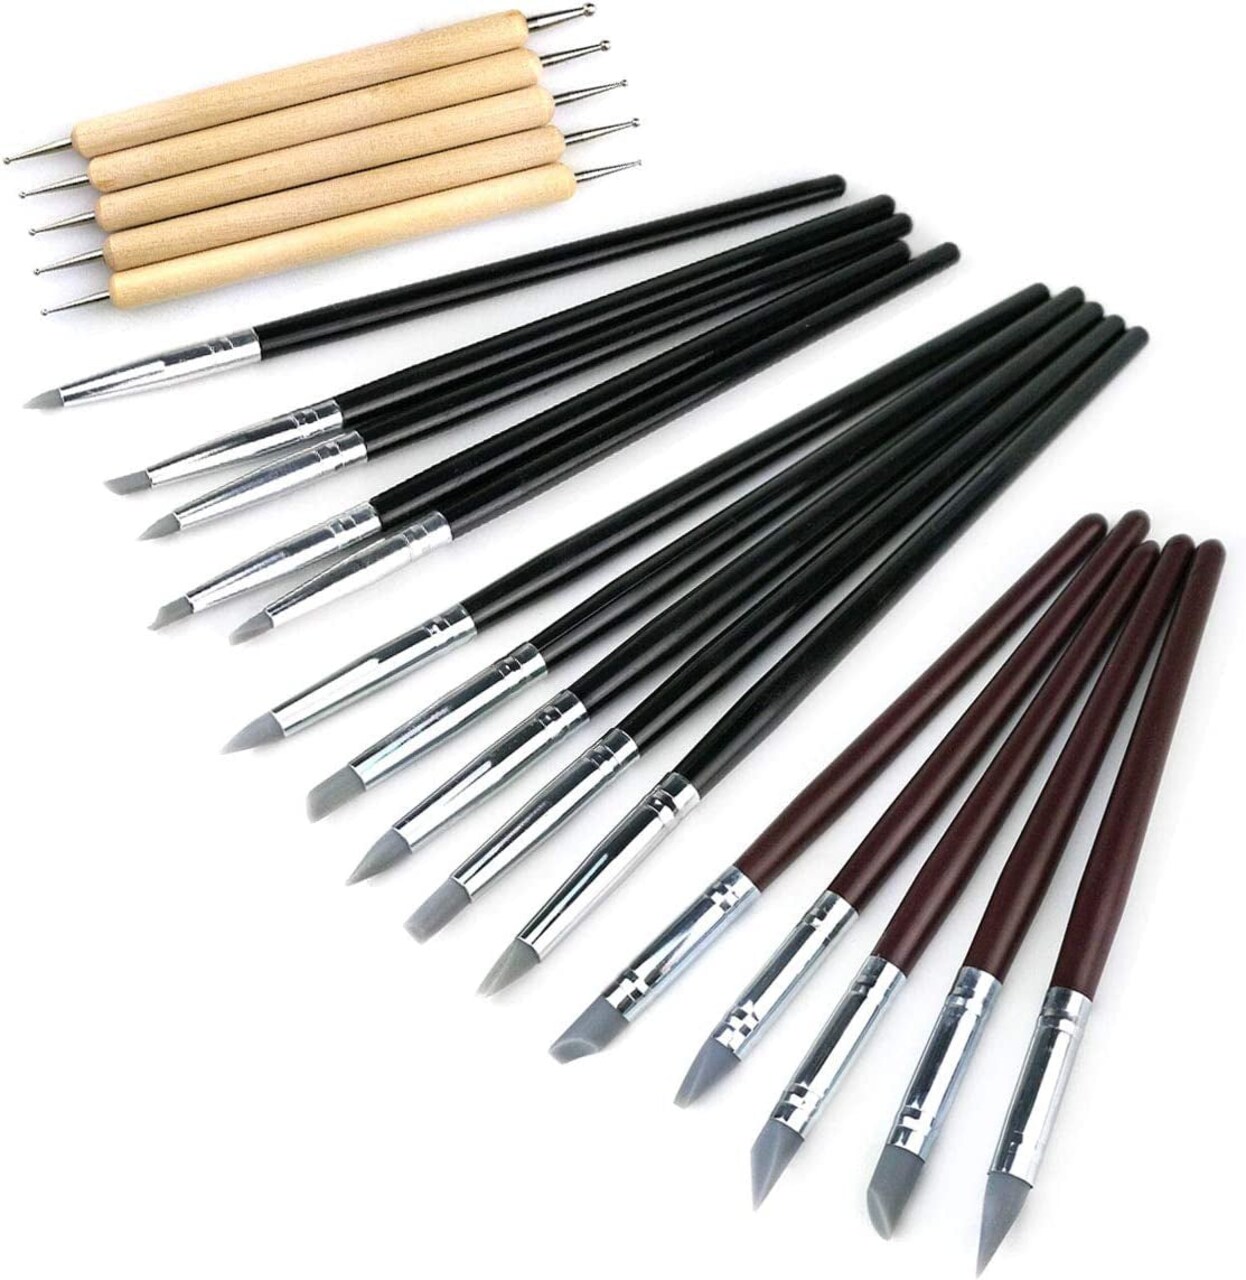 20Pcs Silicone Clay Sculpting Tool Clay Shaping Modeling Wipe Out Tools,  Modeling Dotting Tool Pottery Clay Sculpture Carving Tools